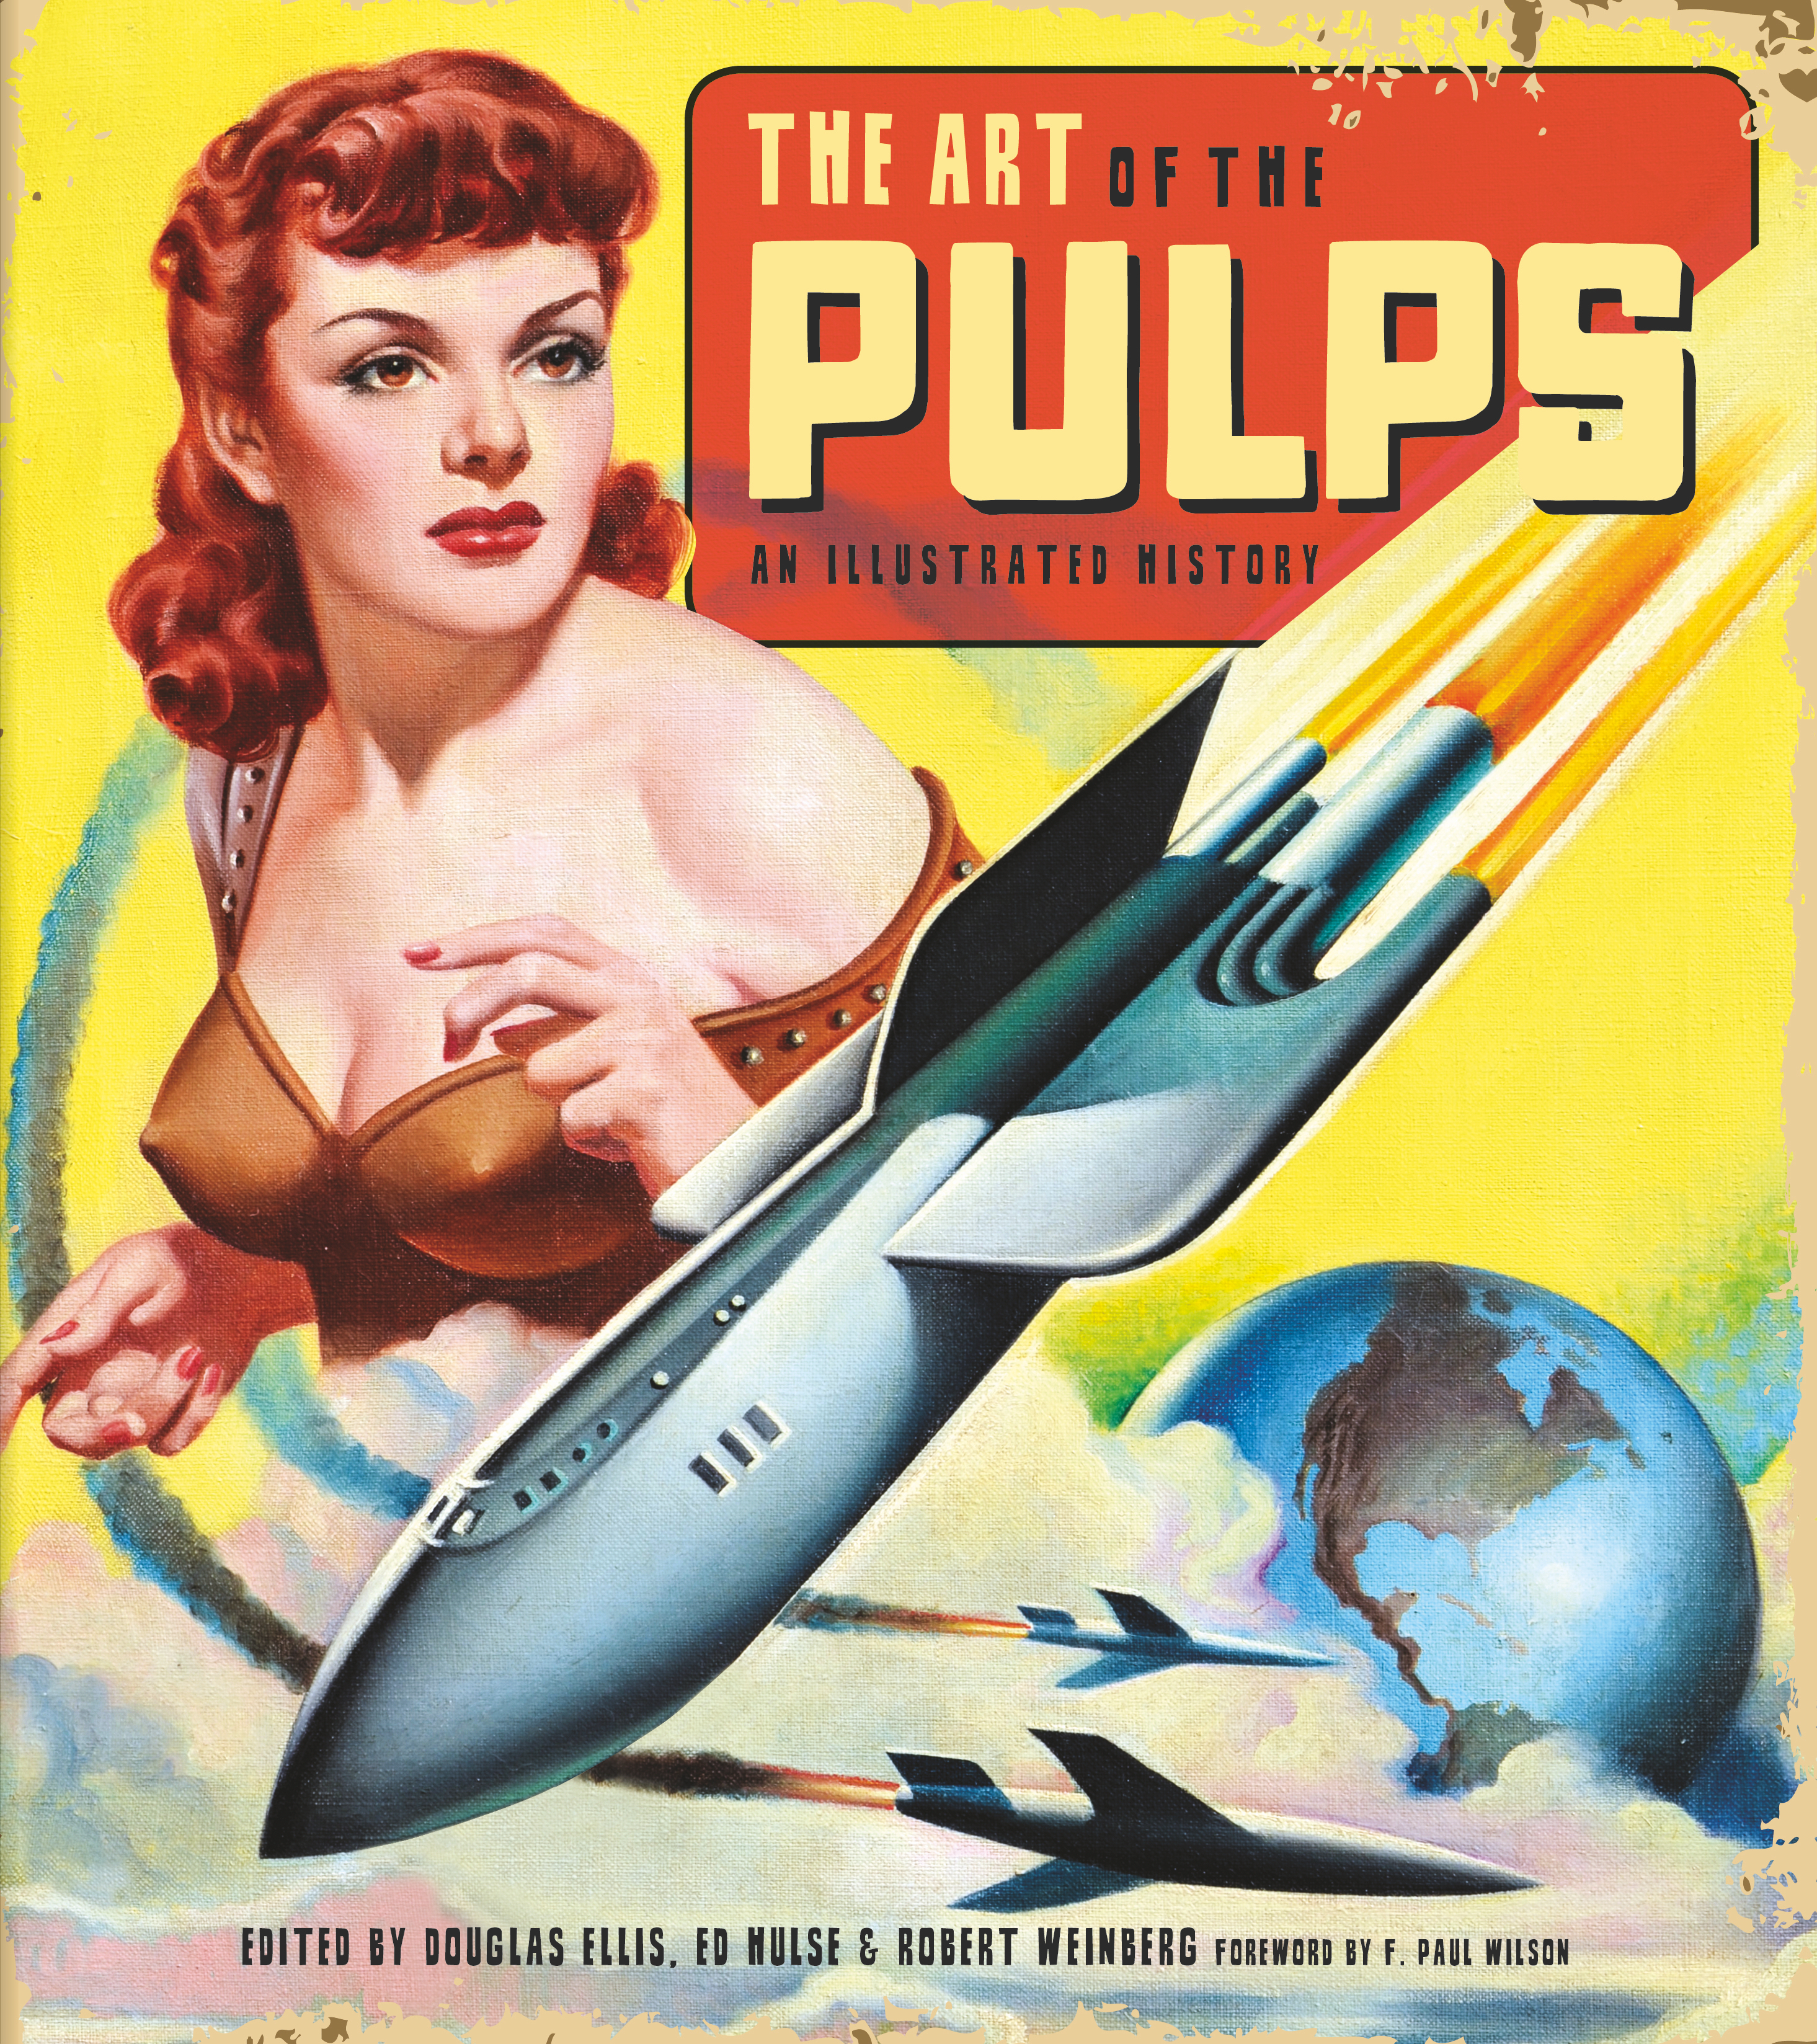 Art of the Pulps an Illustrated History Hardcover